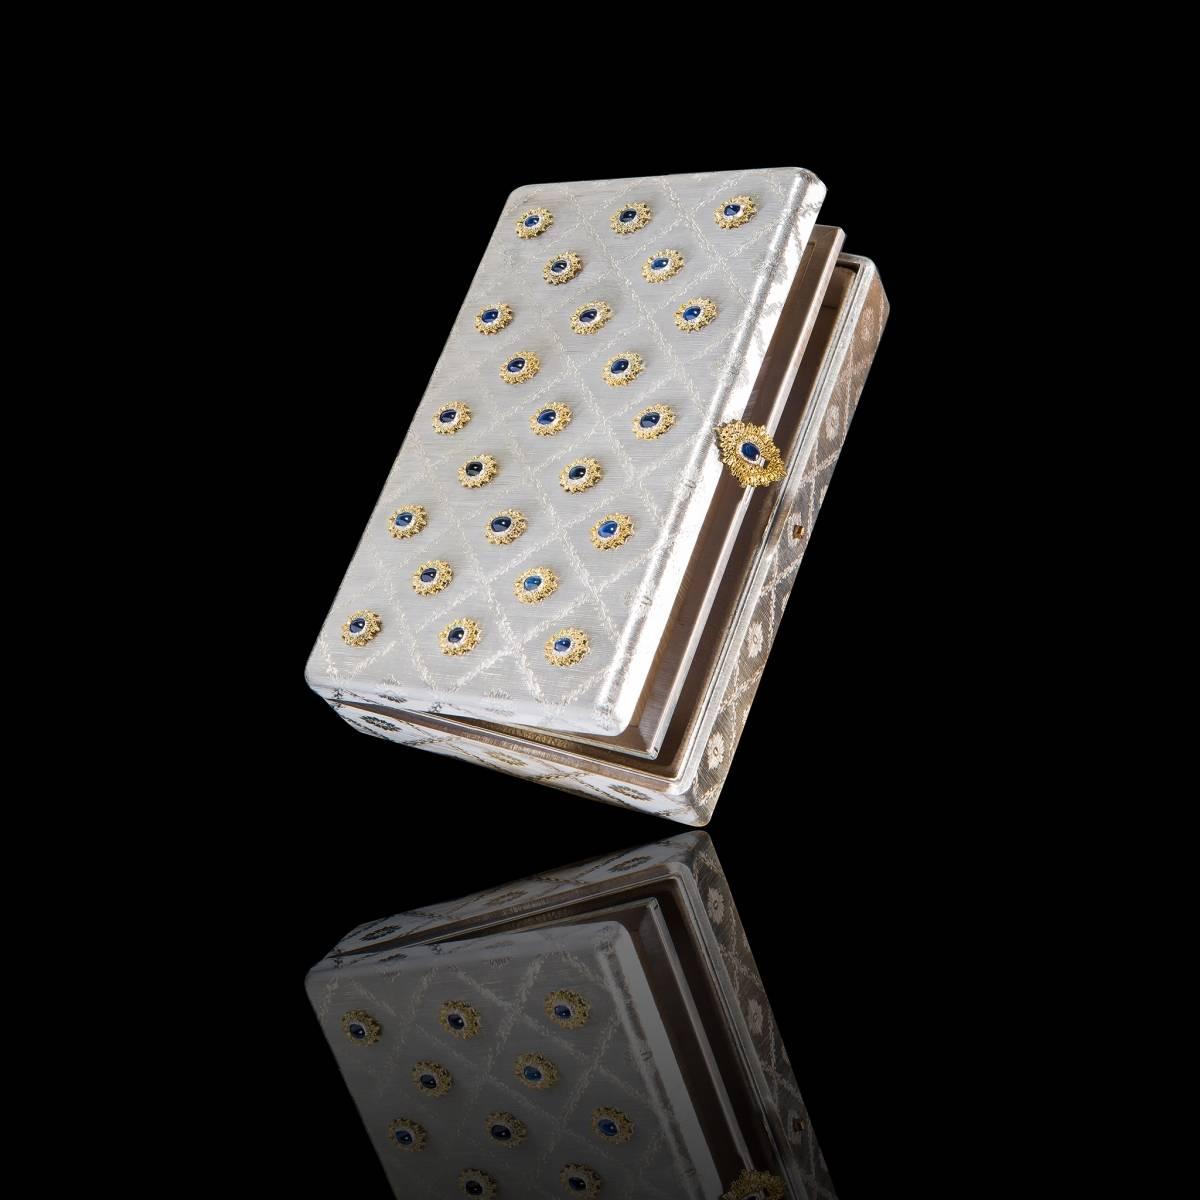 Gianmaria Buccellati's Minaudière, Sapphires, 18 Carat Gold and Silver In Excellent Condition For Sale In London, GB